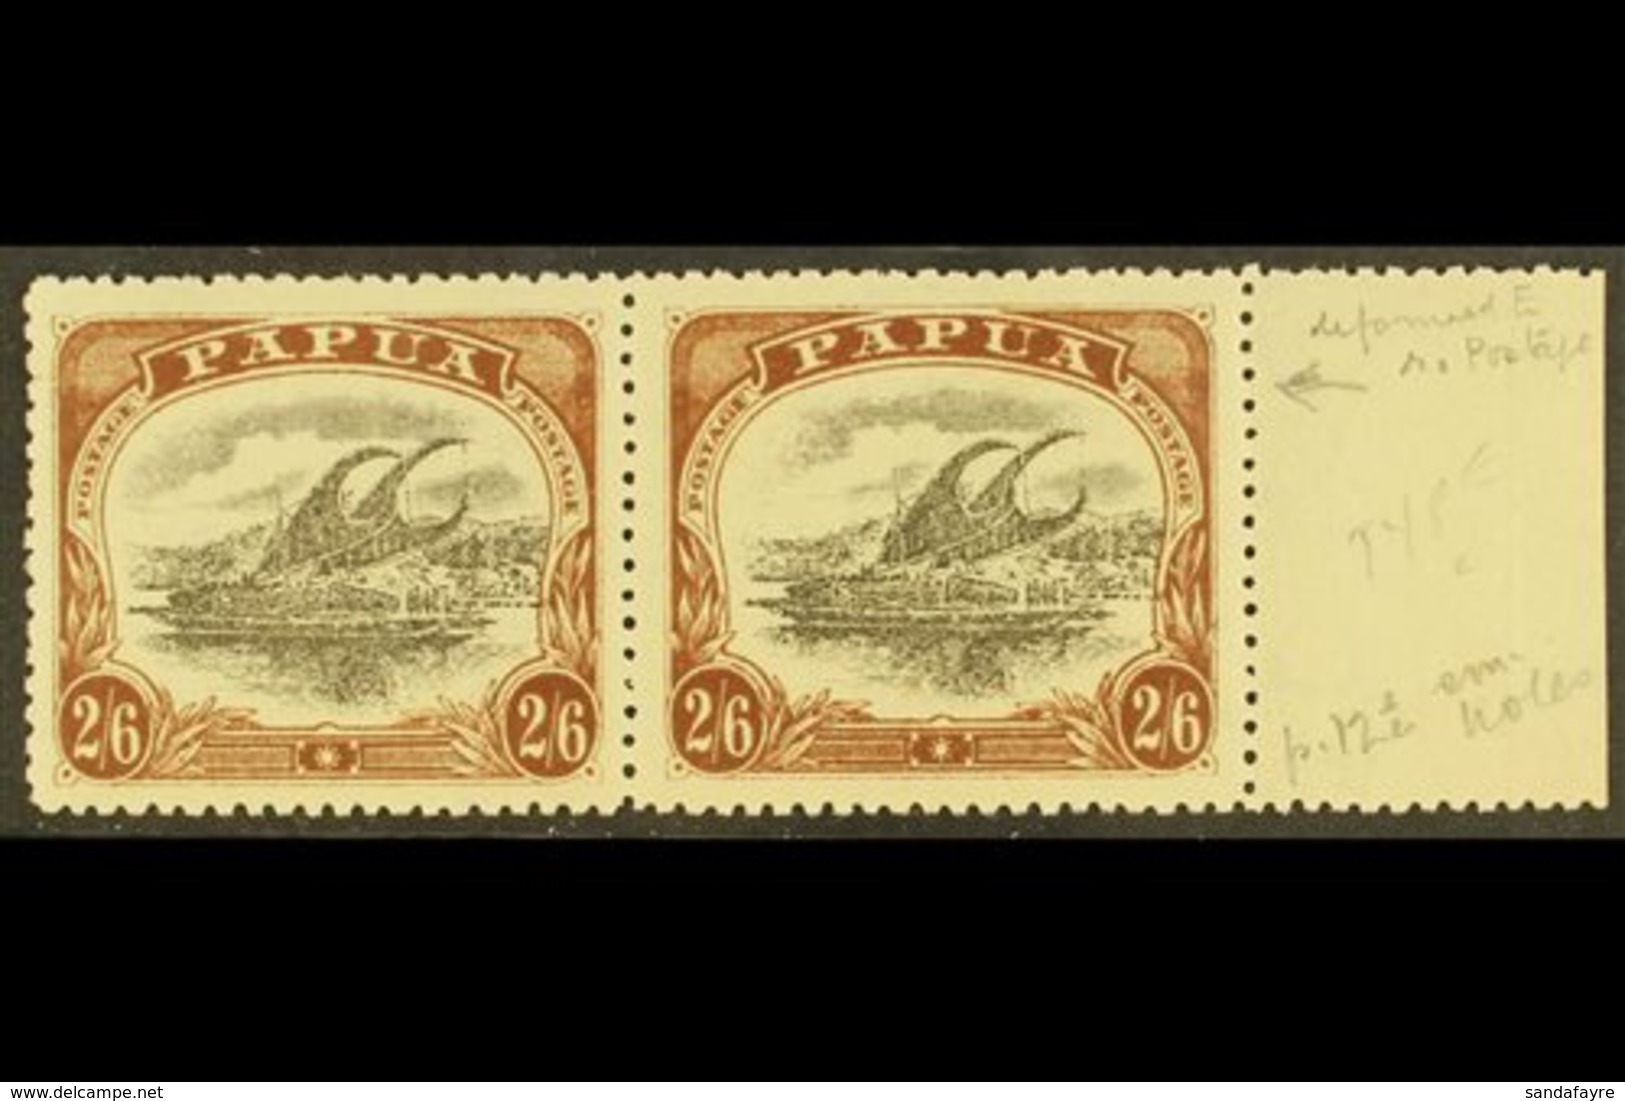 1910-11 2s6d Black & Brown Lakatoi Type C, SG 83, Fine Mint Marginal Pair, One Stamp With DEFORMED "E" AT LEFT Variety ( - Papoea-Nieuw-Guinea